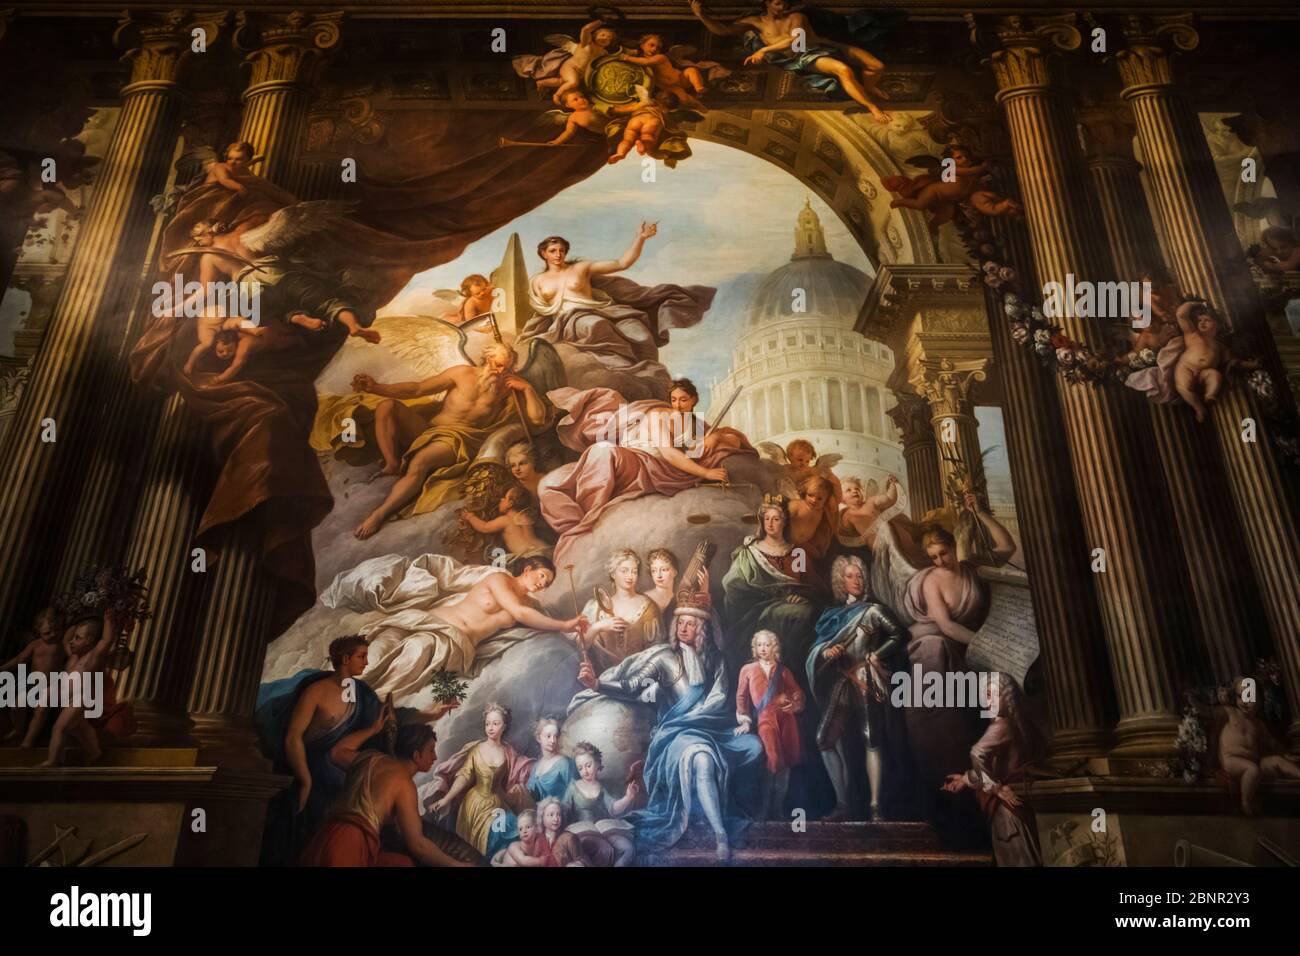 England, London, Greenwich, The Old Royal Naval College, The Painted Hall, The West Wall, Artwork Showing George I, Prince Frederick, and George II Surrounded by Various Gods and Members of The Royal Family Stock Photo